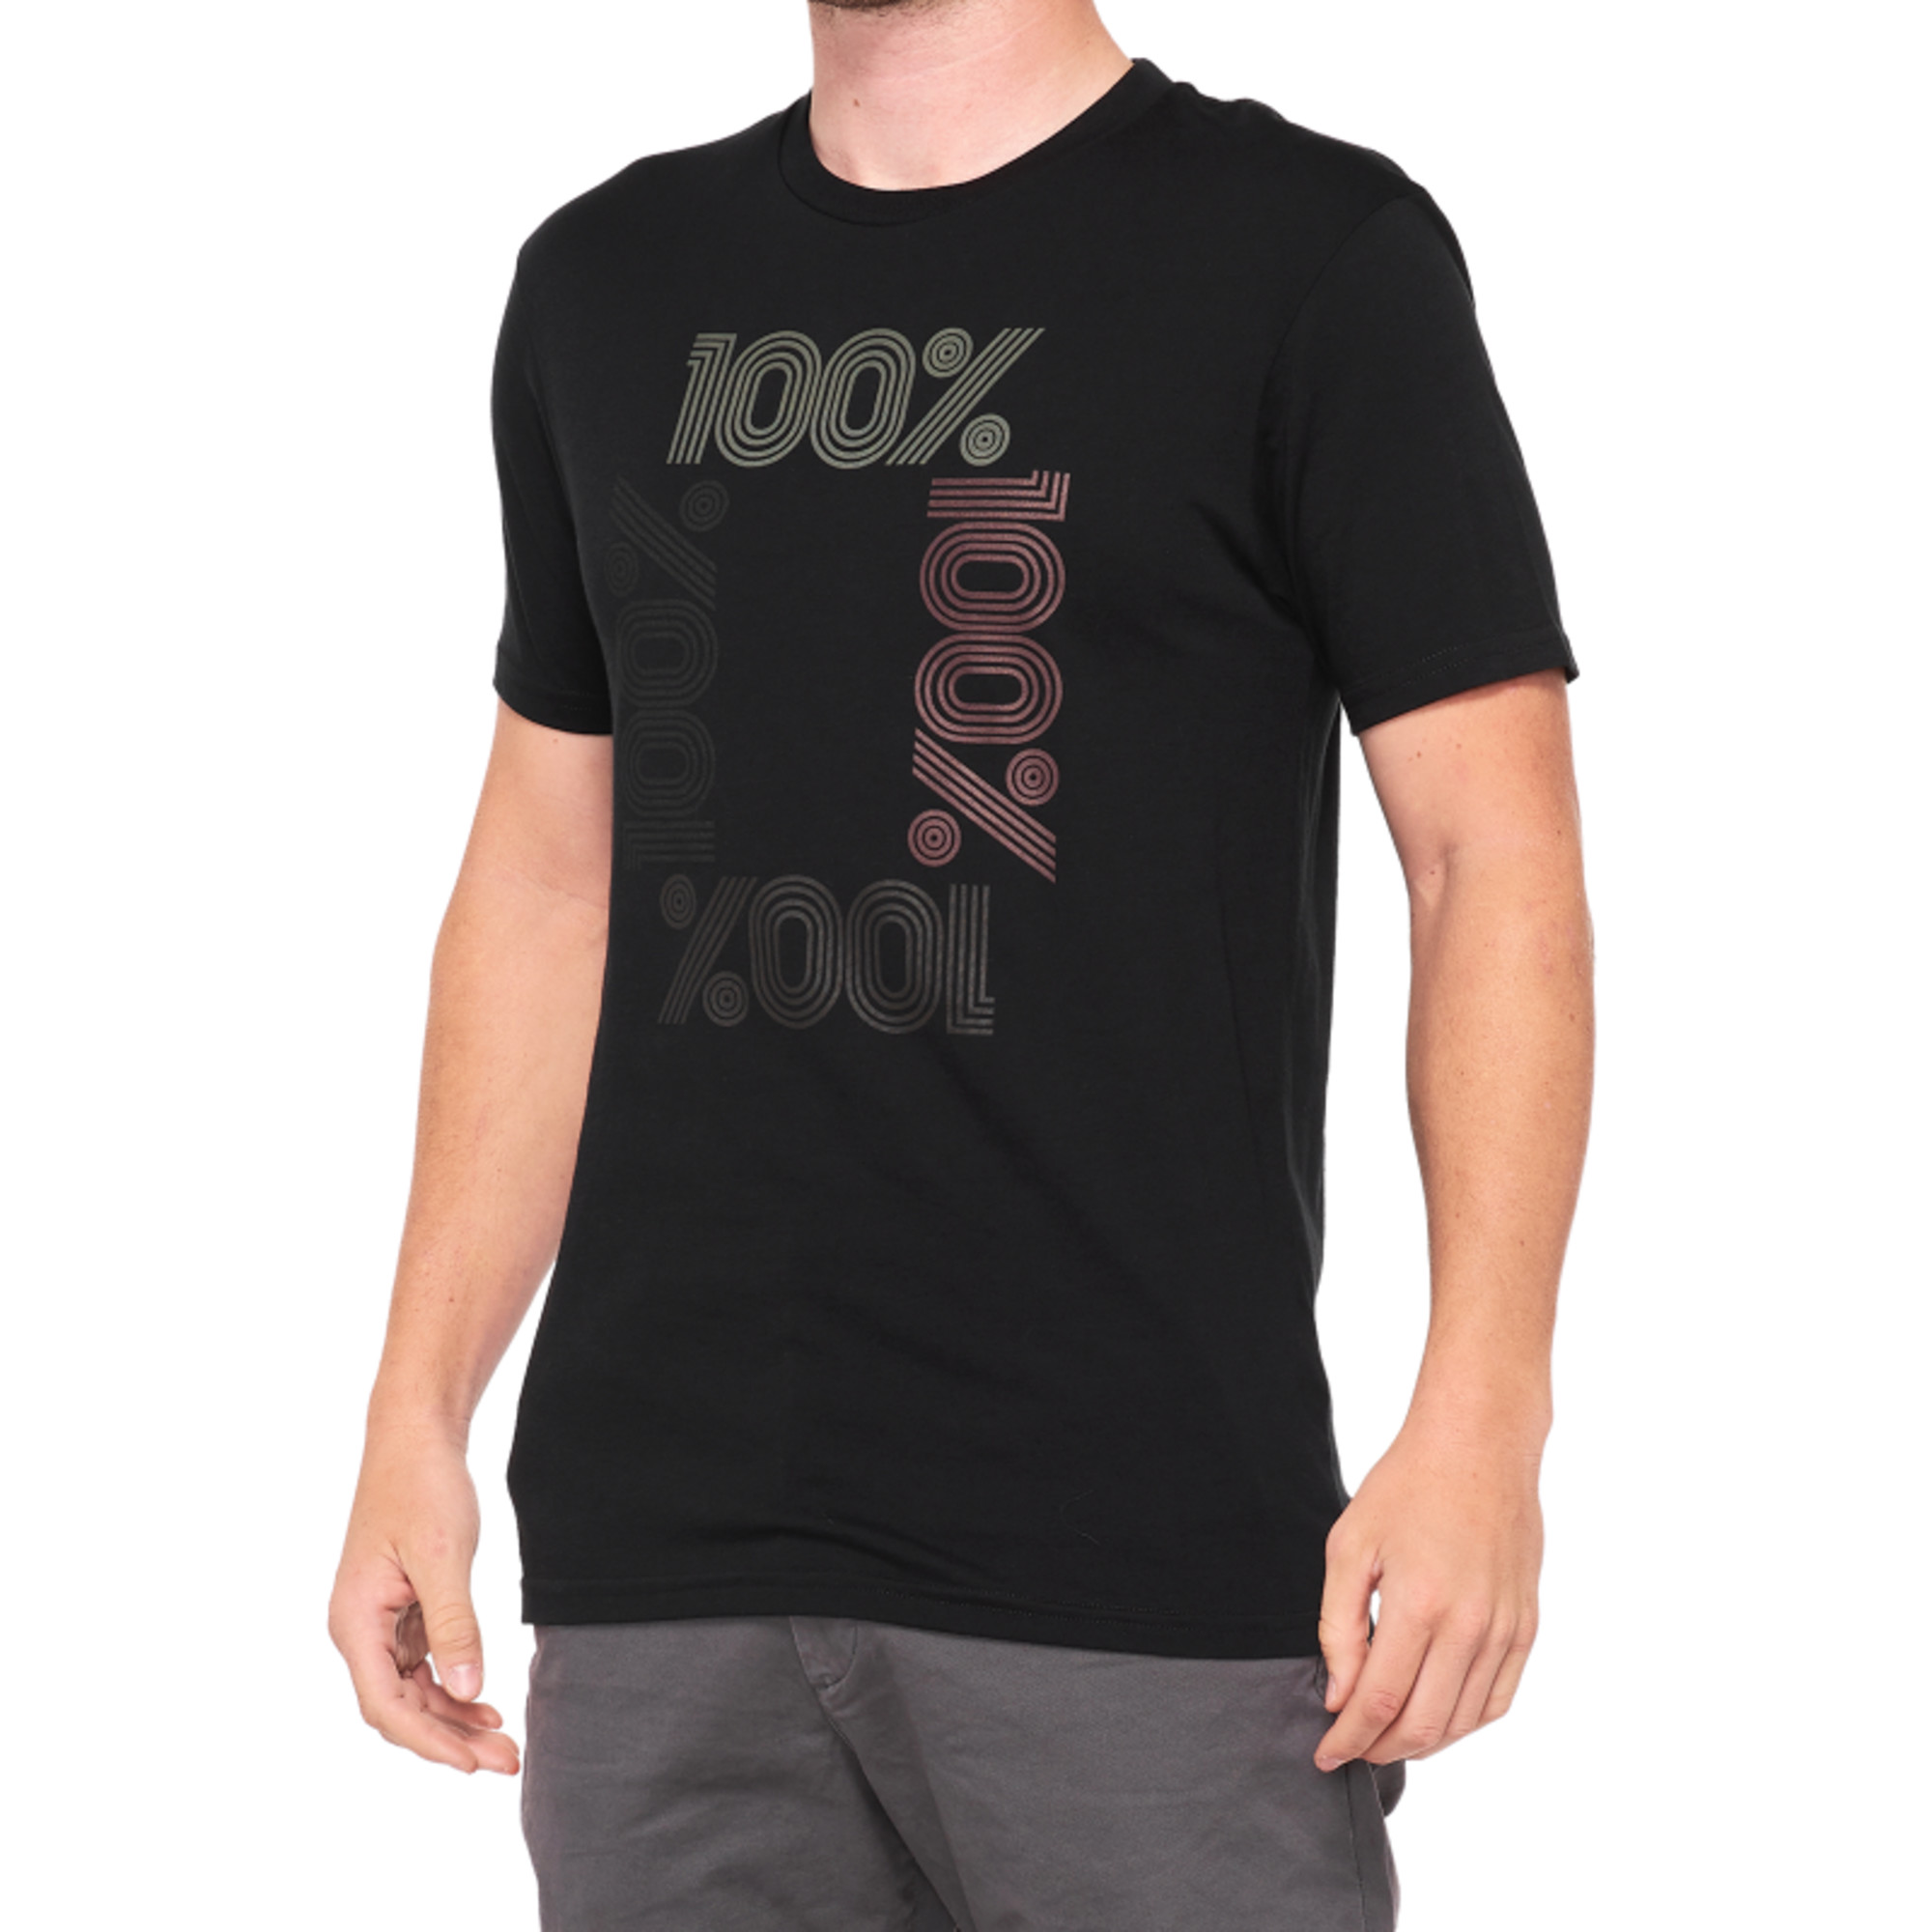 100 percent t-shirt shirts for men encrypted